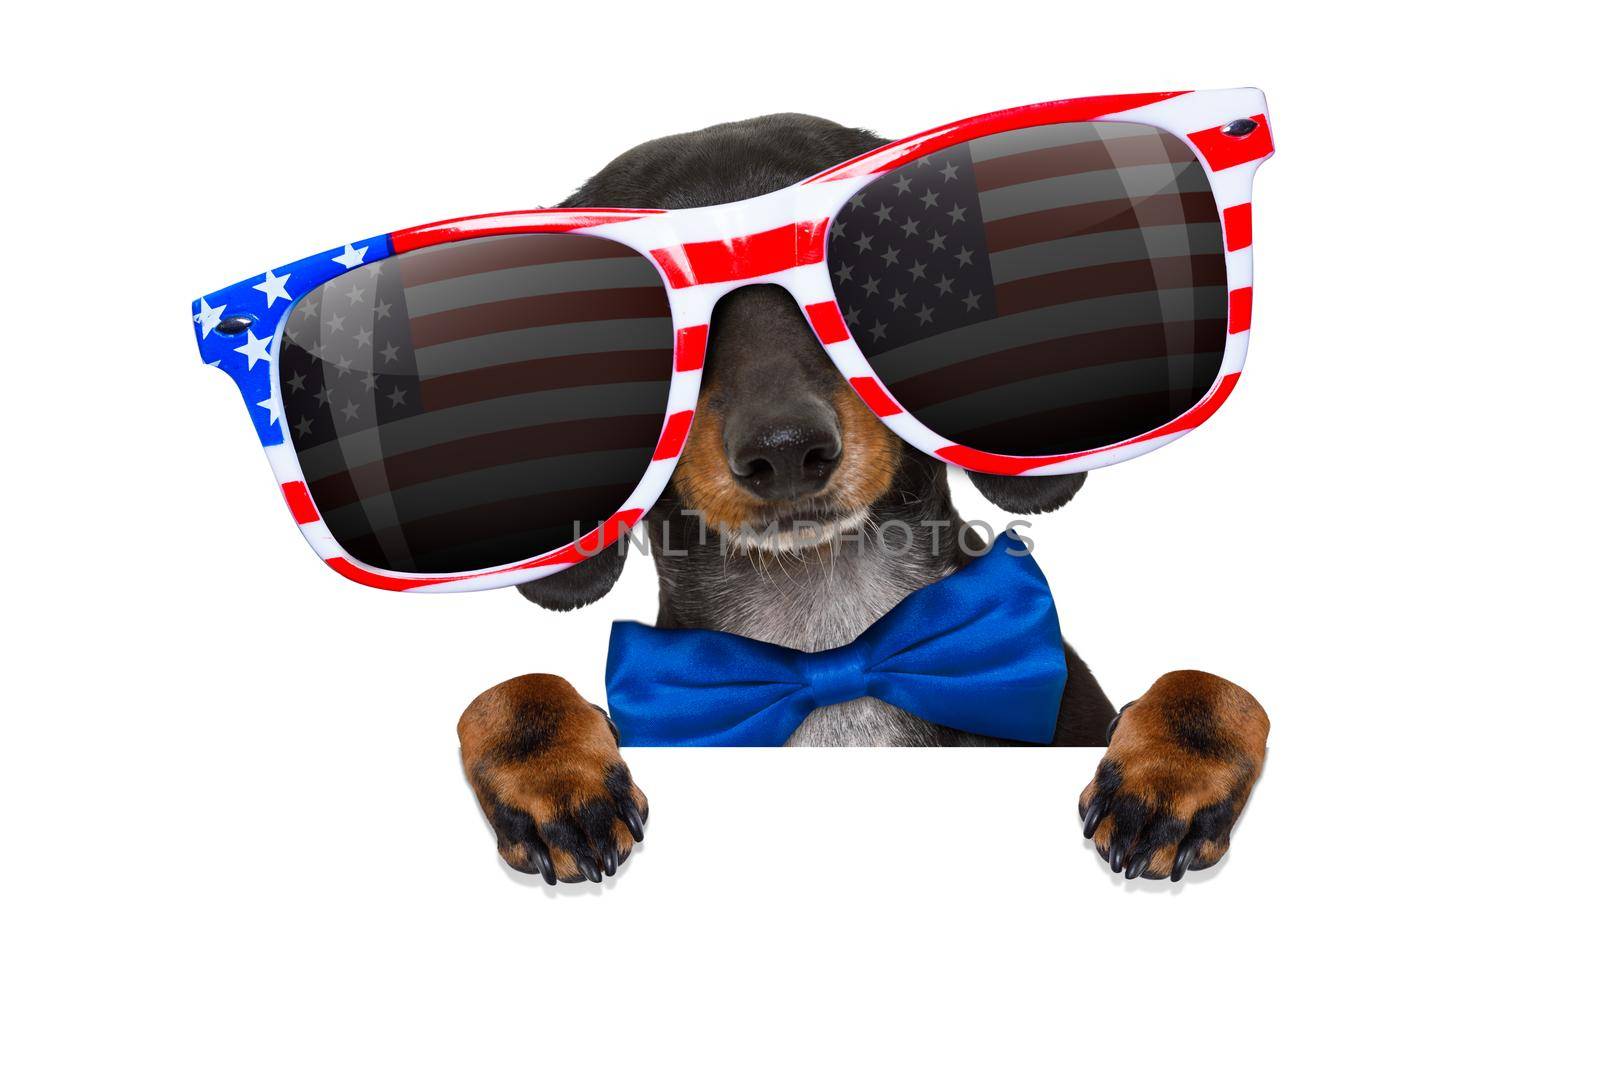 dachshund sausage dog wearing sunglasses of usa  on  independence day 4th of july, reflections on  glasses, isolated on white background